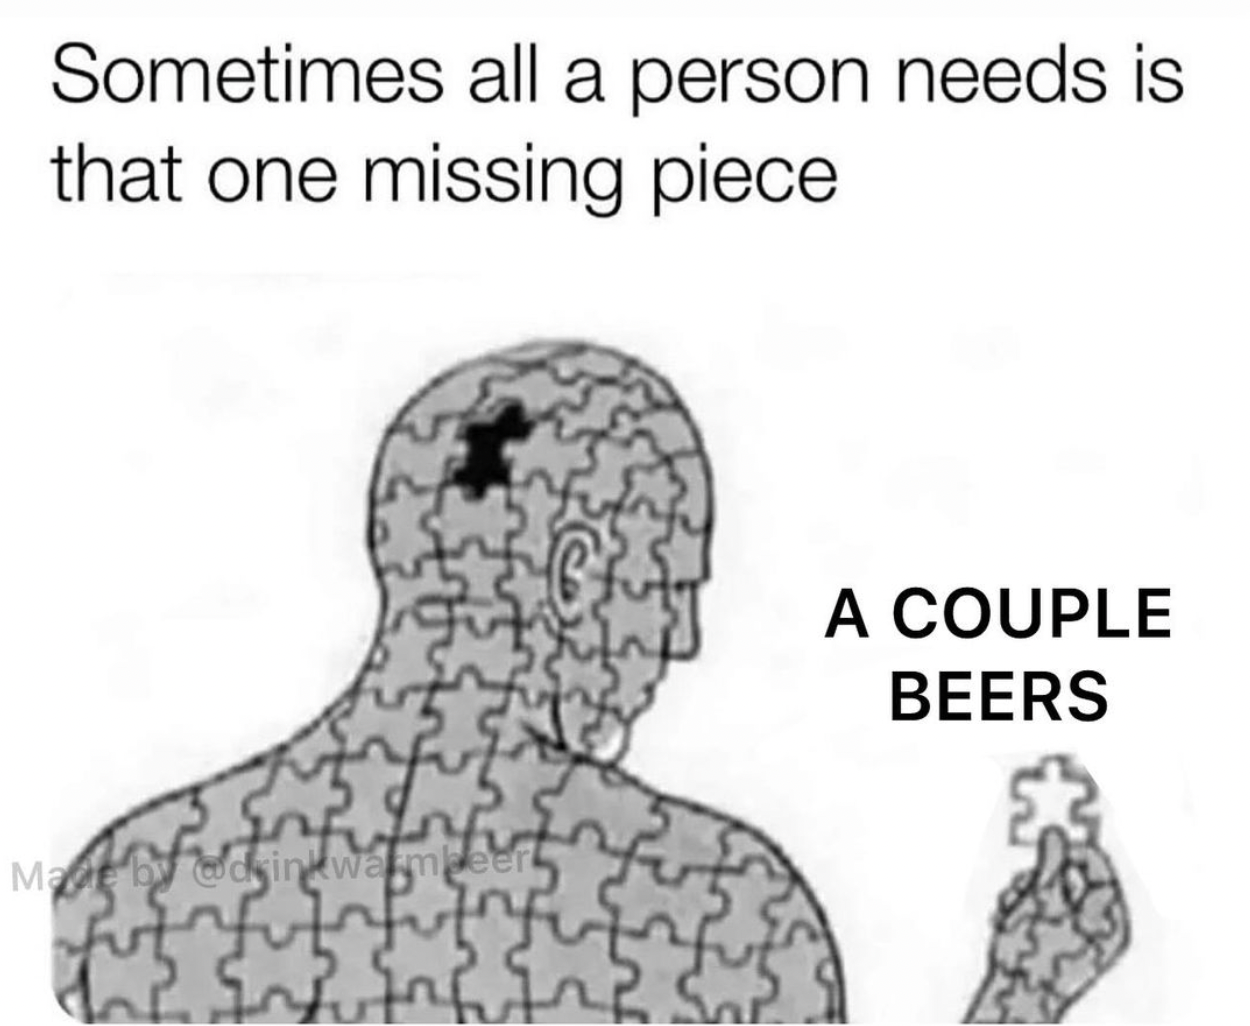 sometimes all a person needs is one piece - Sometimes all a person needs is that one missing piece Mart by dinkwampeer A Couple Beers